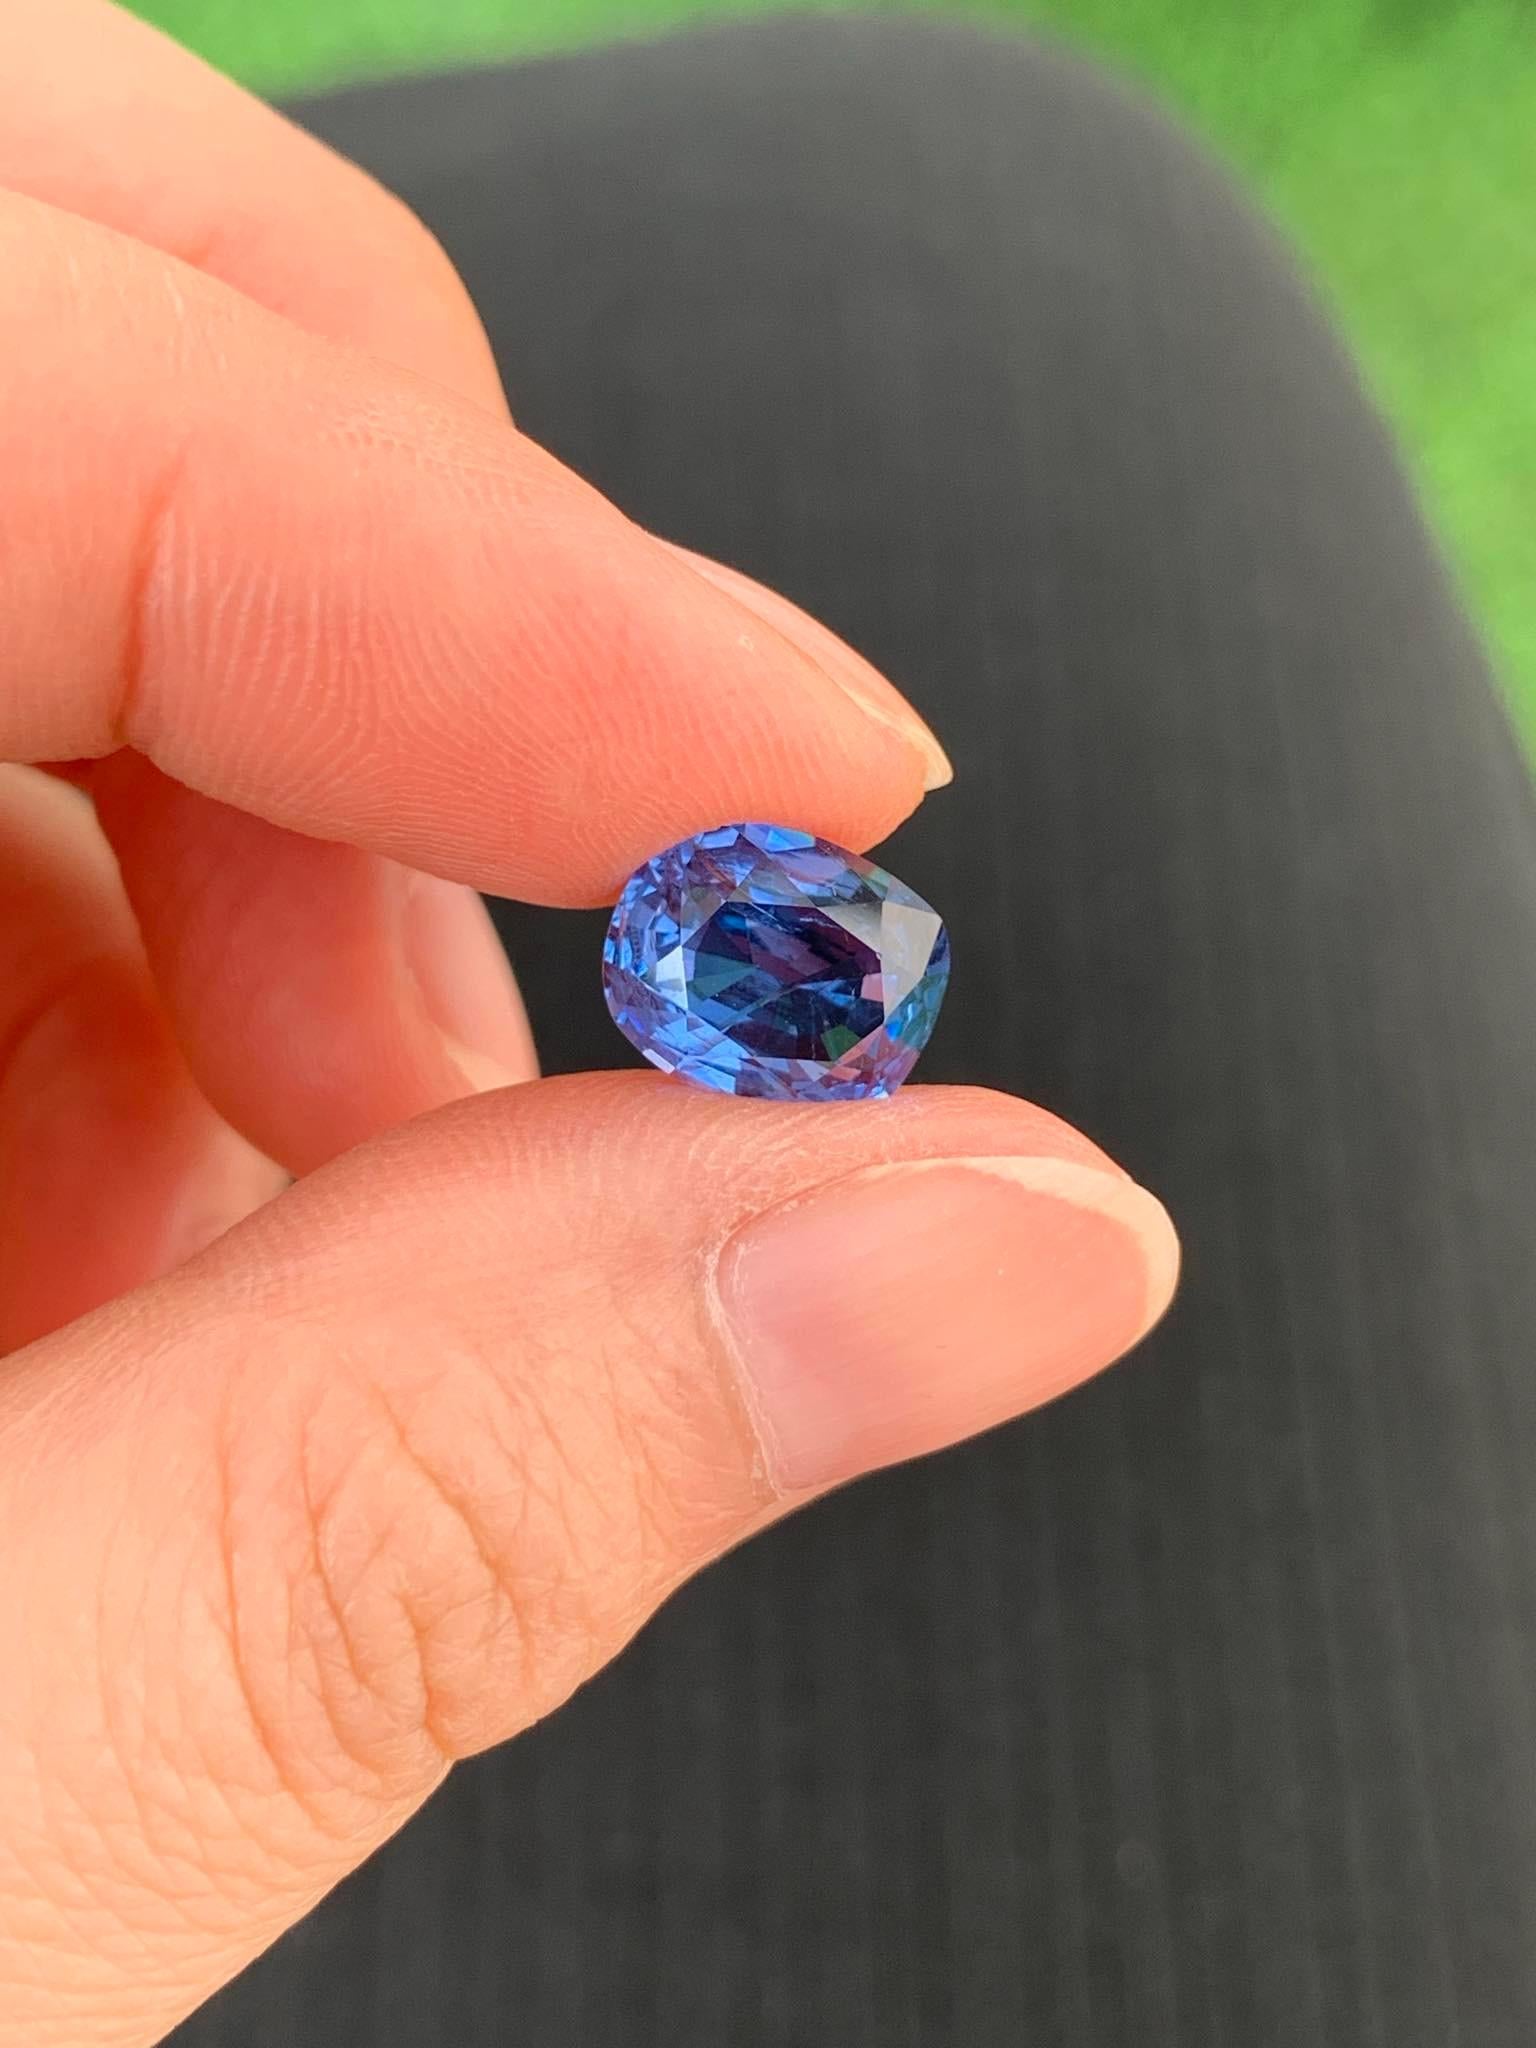 When it comes to Cobalt Spinel from the Famous Neon Blue Mine of Vietnam everyone knows that to have a faceted Cobalt Spinel over .5ct is extremely rare rare . A color changing cobalt Spinel has never been found until now.  This fine high quality